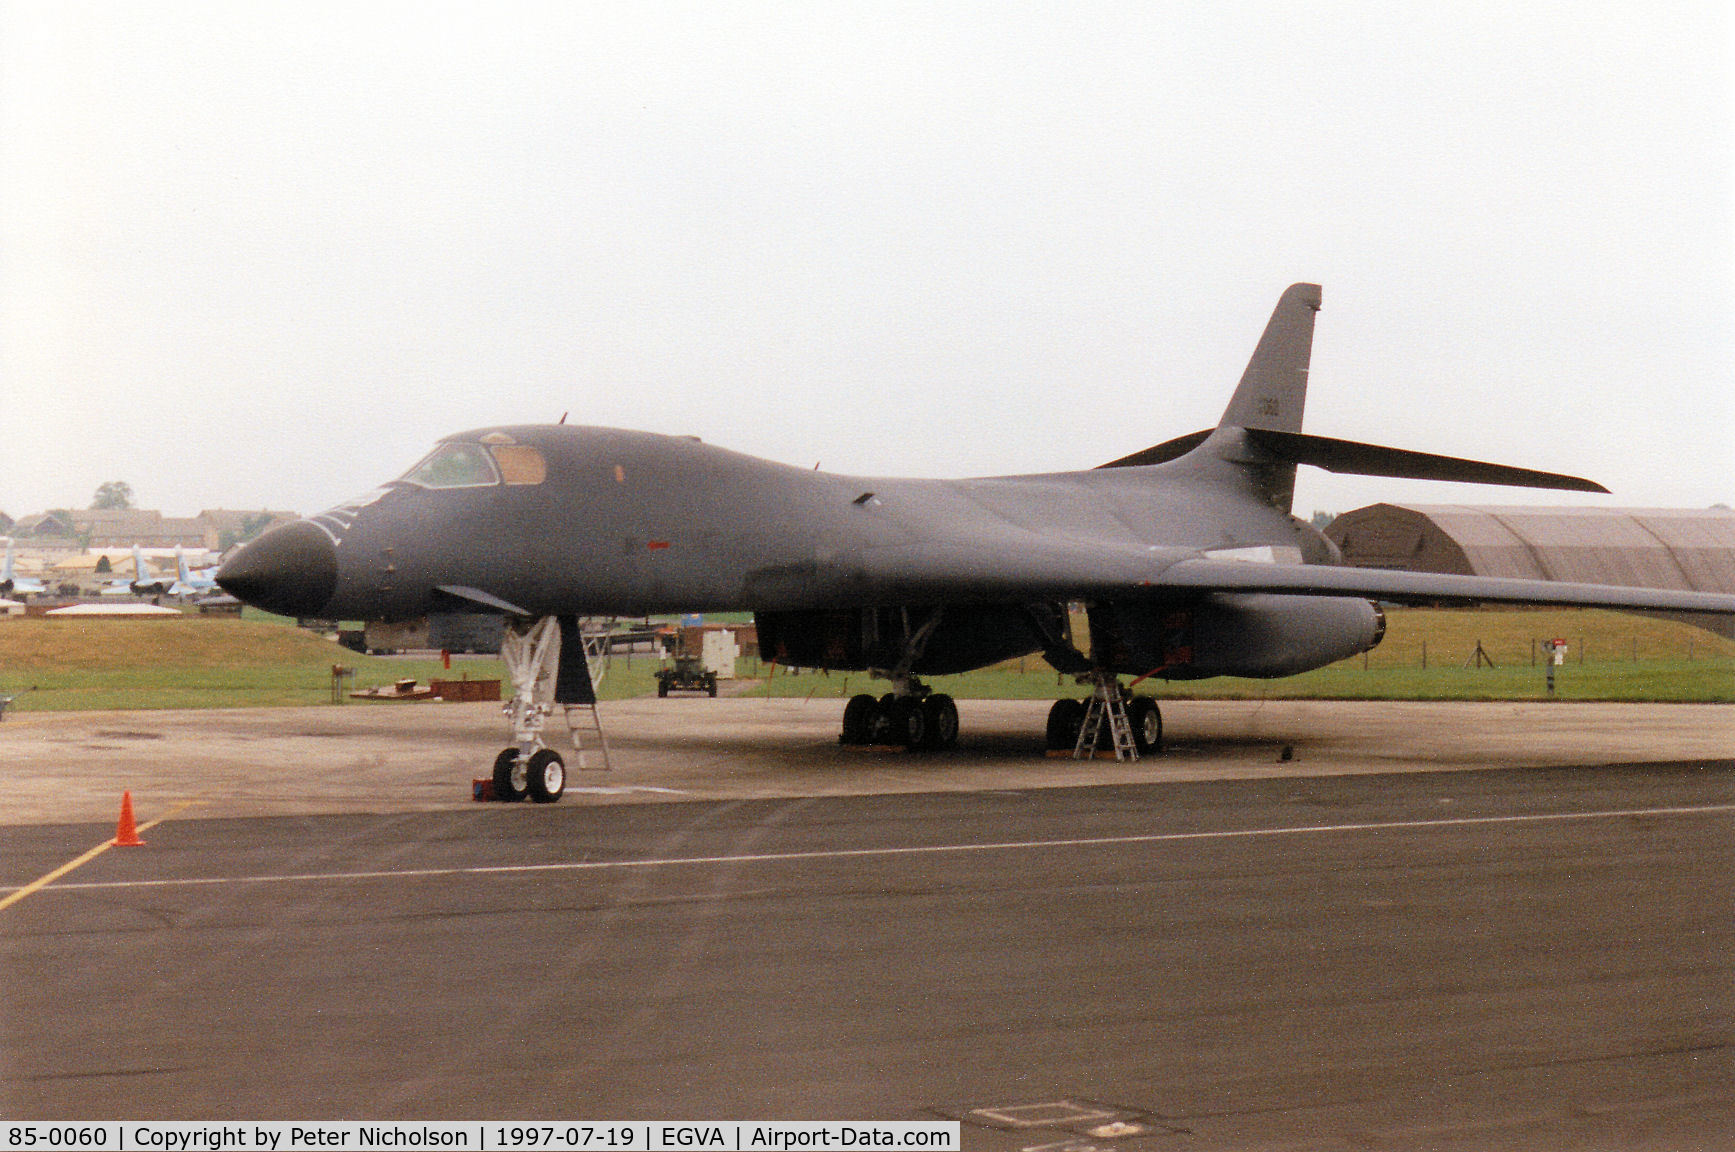 85-0060, 1985 Rockwell B-1B Lancer C/N 20, B-1B Lancer, callsign Jayhawk 52, of the Kansas Air National Guard's 184th Bomb Wing on the flight-line at the 1997 Intnl Air Tattoo at RAF Fairford.